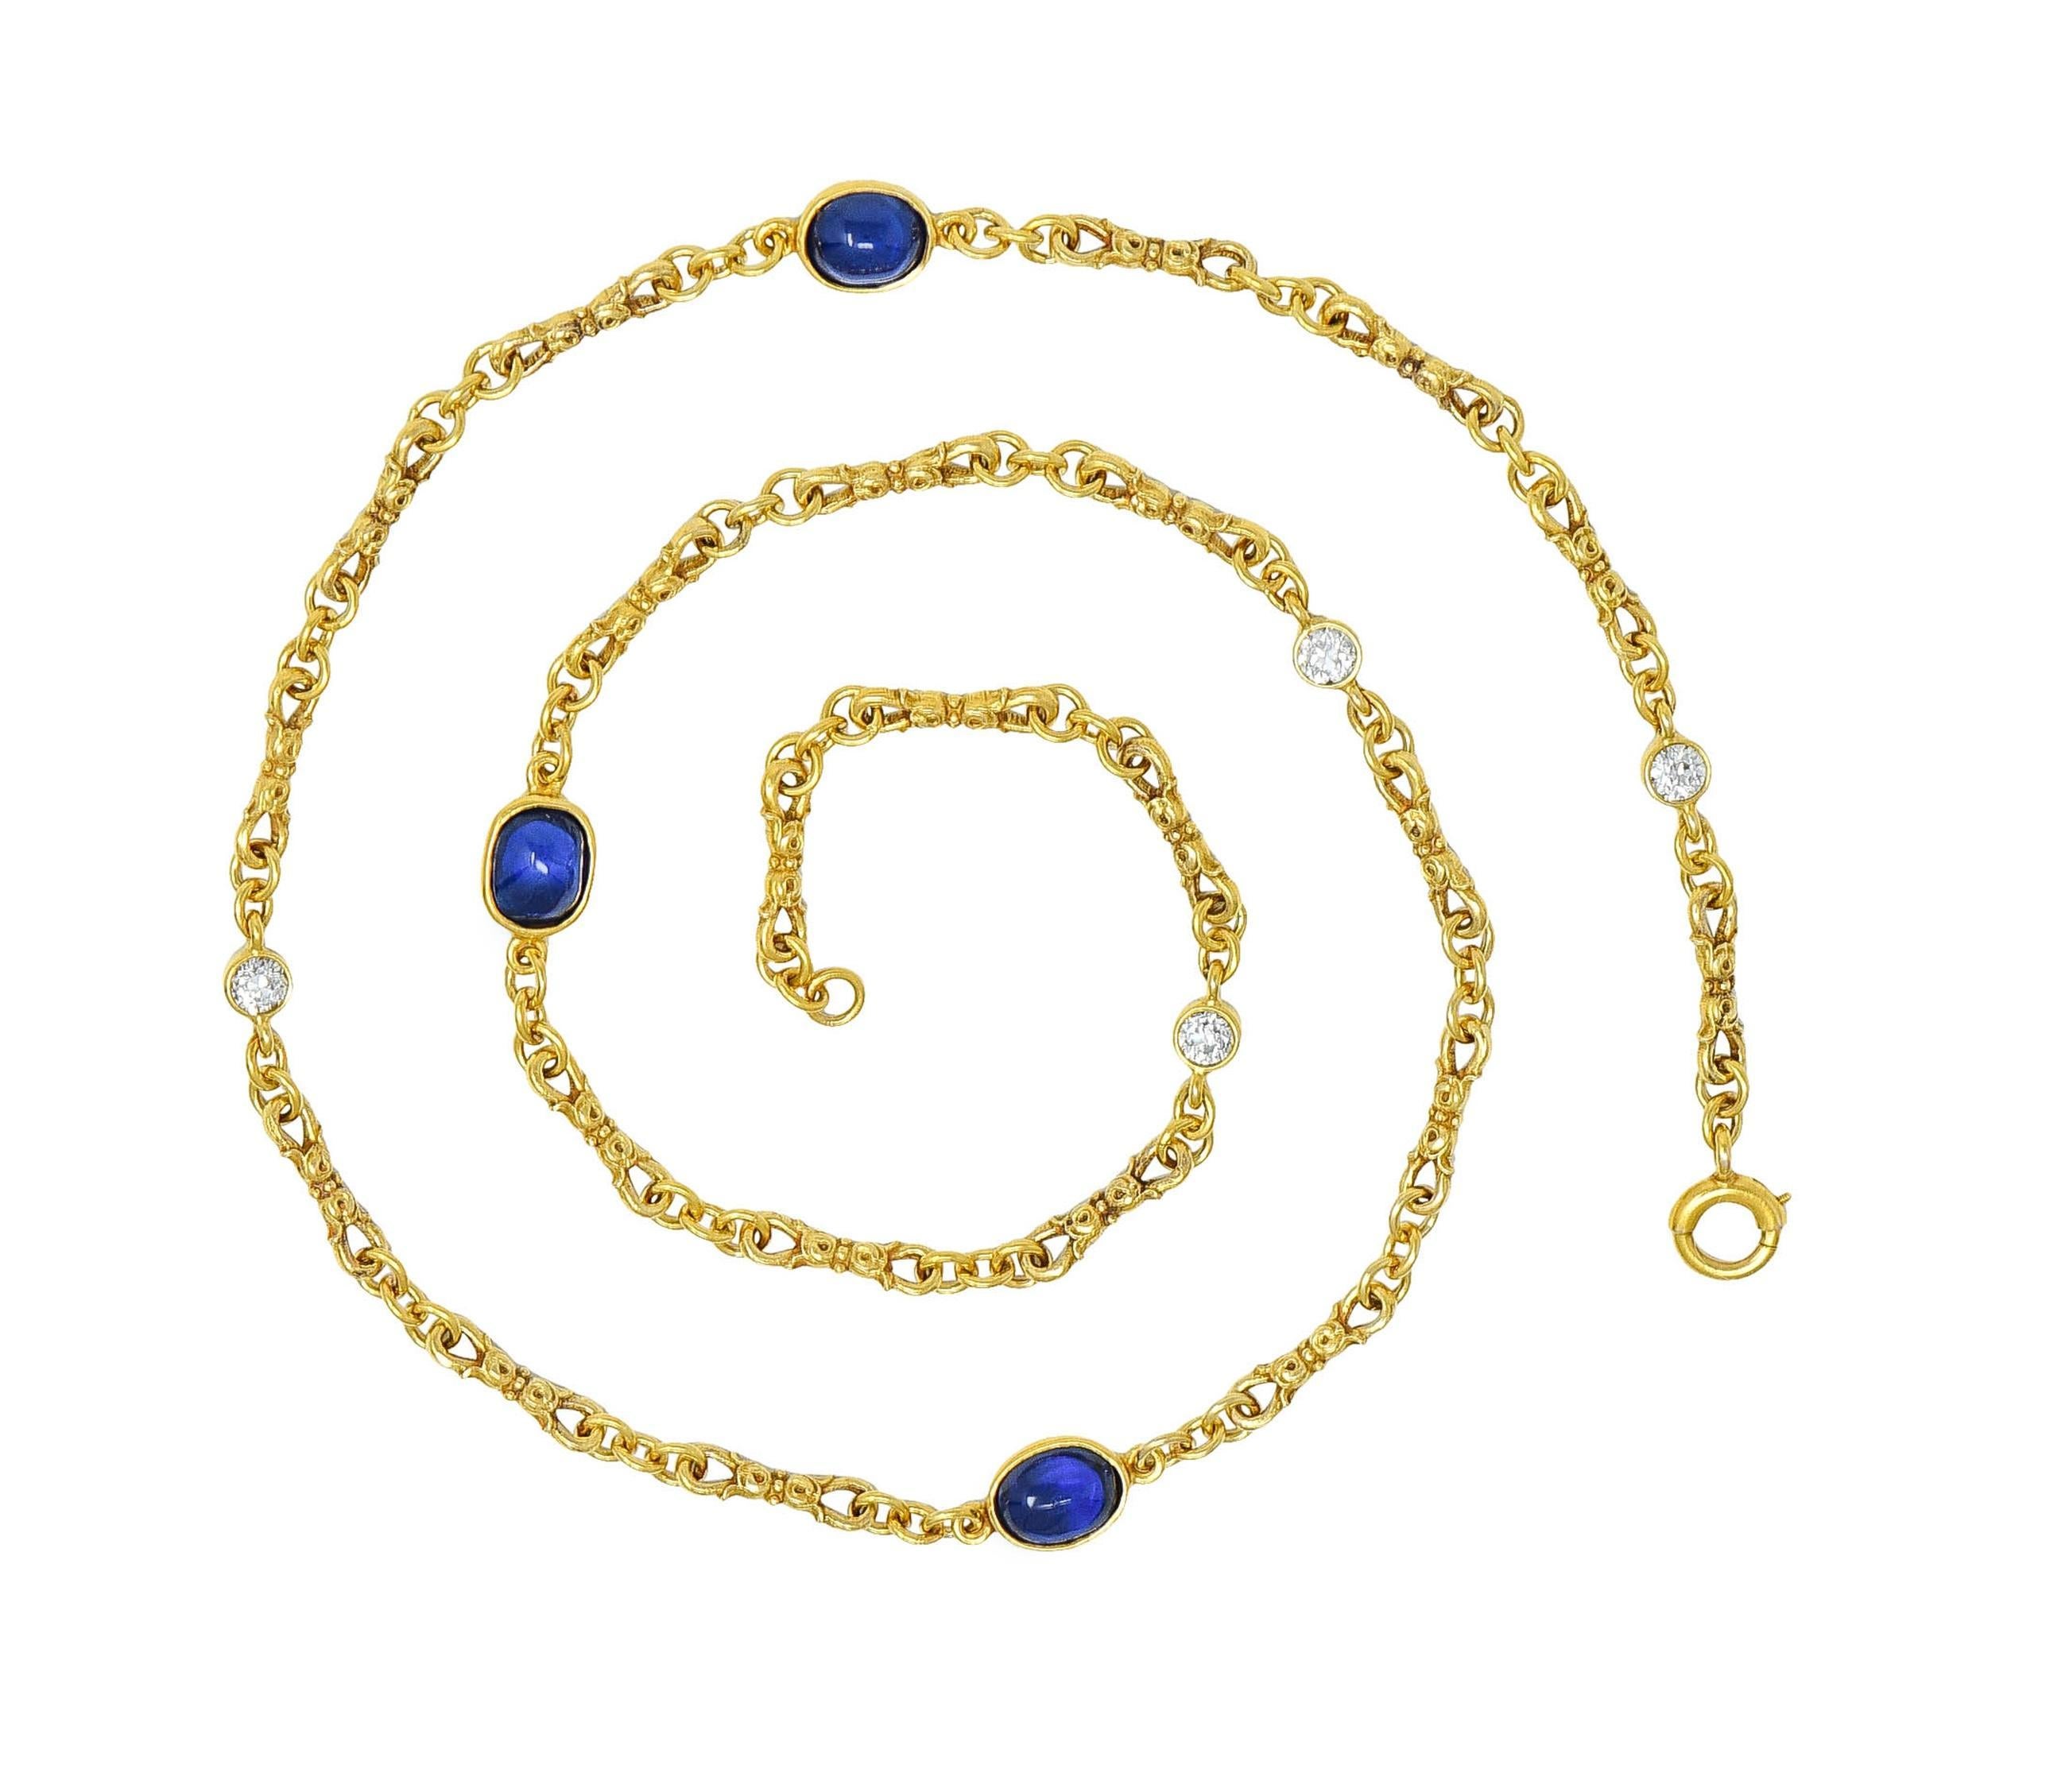 Comprised of fancy floral motif infinity links and cable link chain 
Accented by bezel set sapphire and diamond stations 
Sapphires are cushion-shaped cabochons - transparent medium blue
Weighing approximately 3.54 carats total 
Diamonds are old